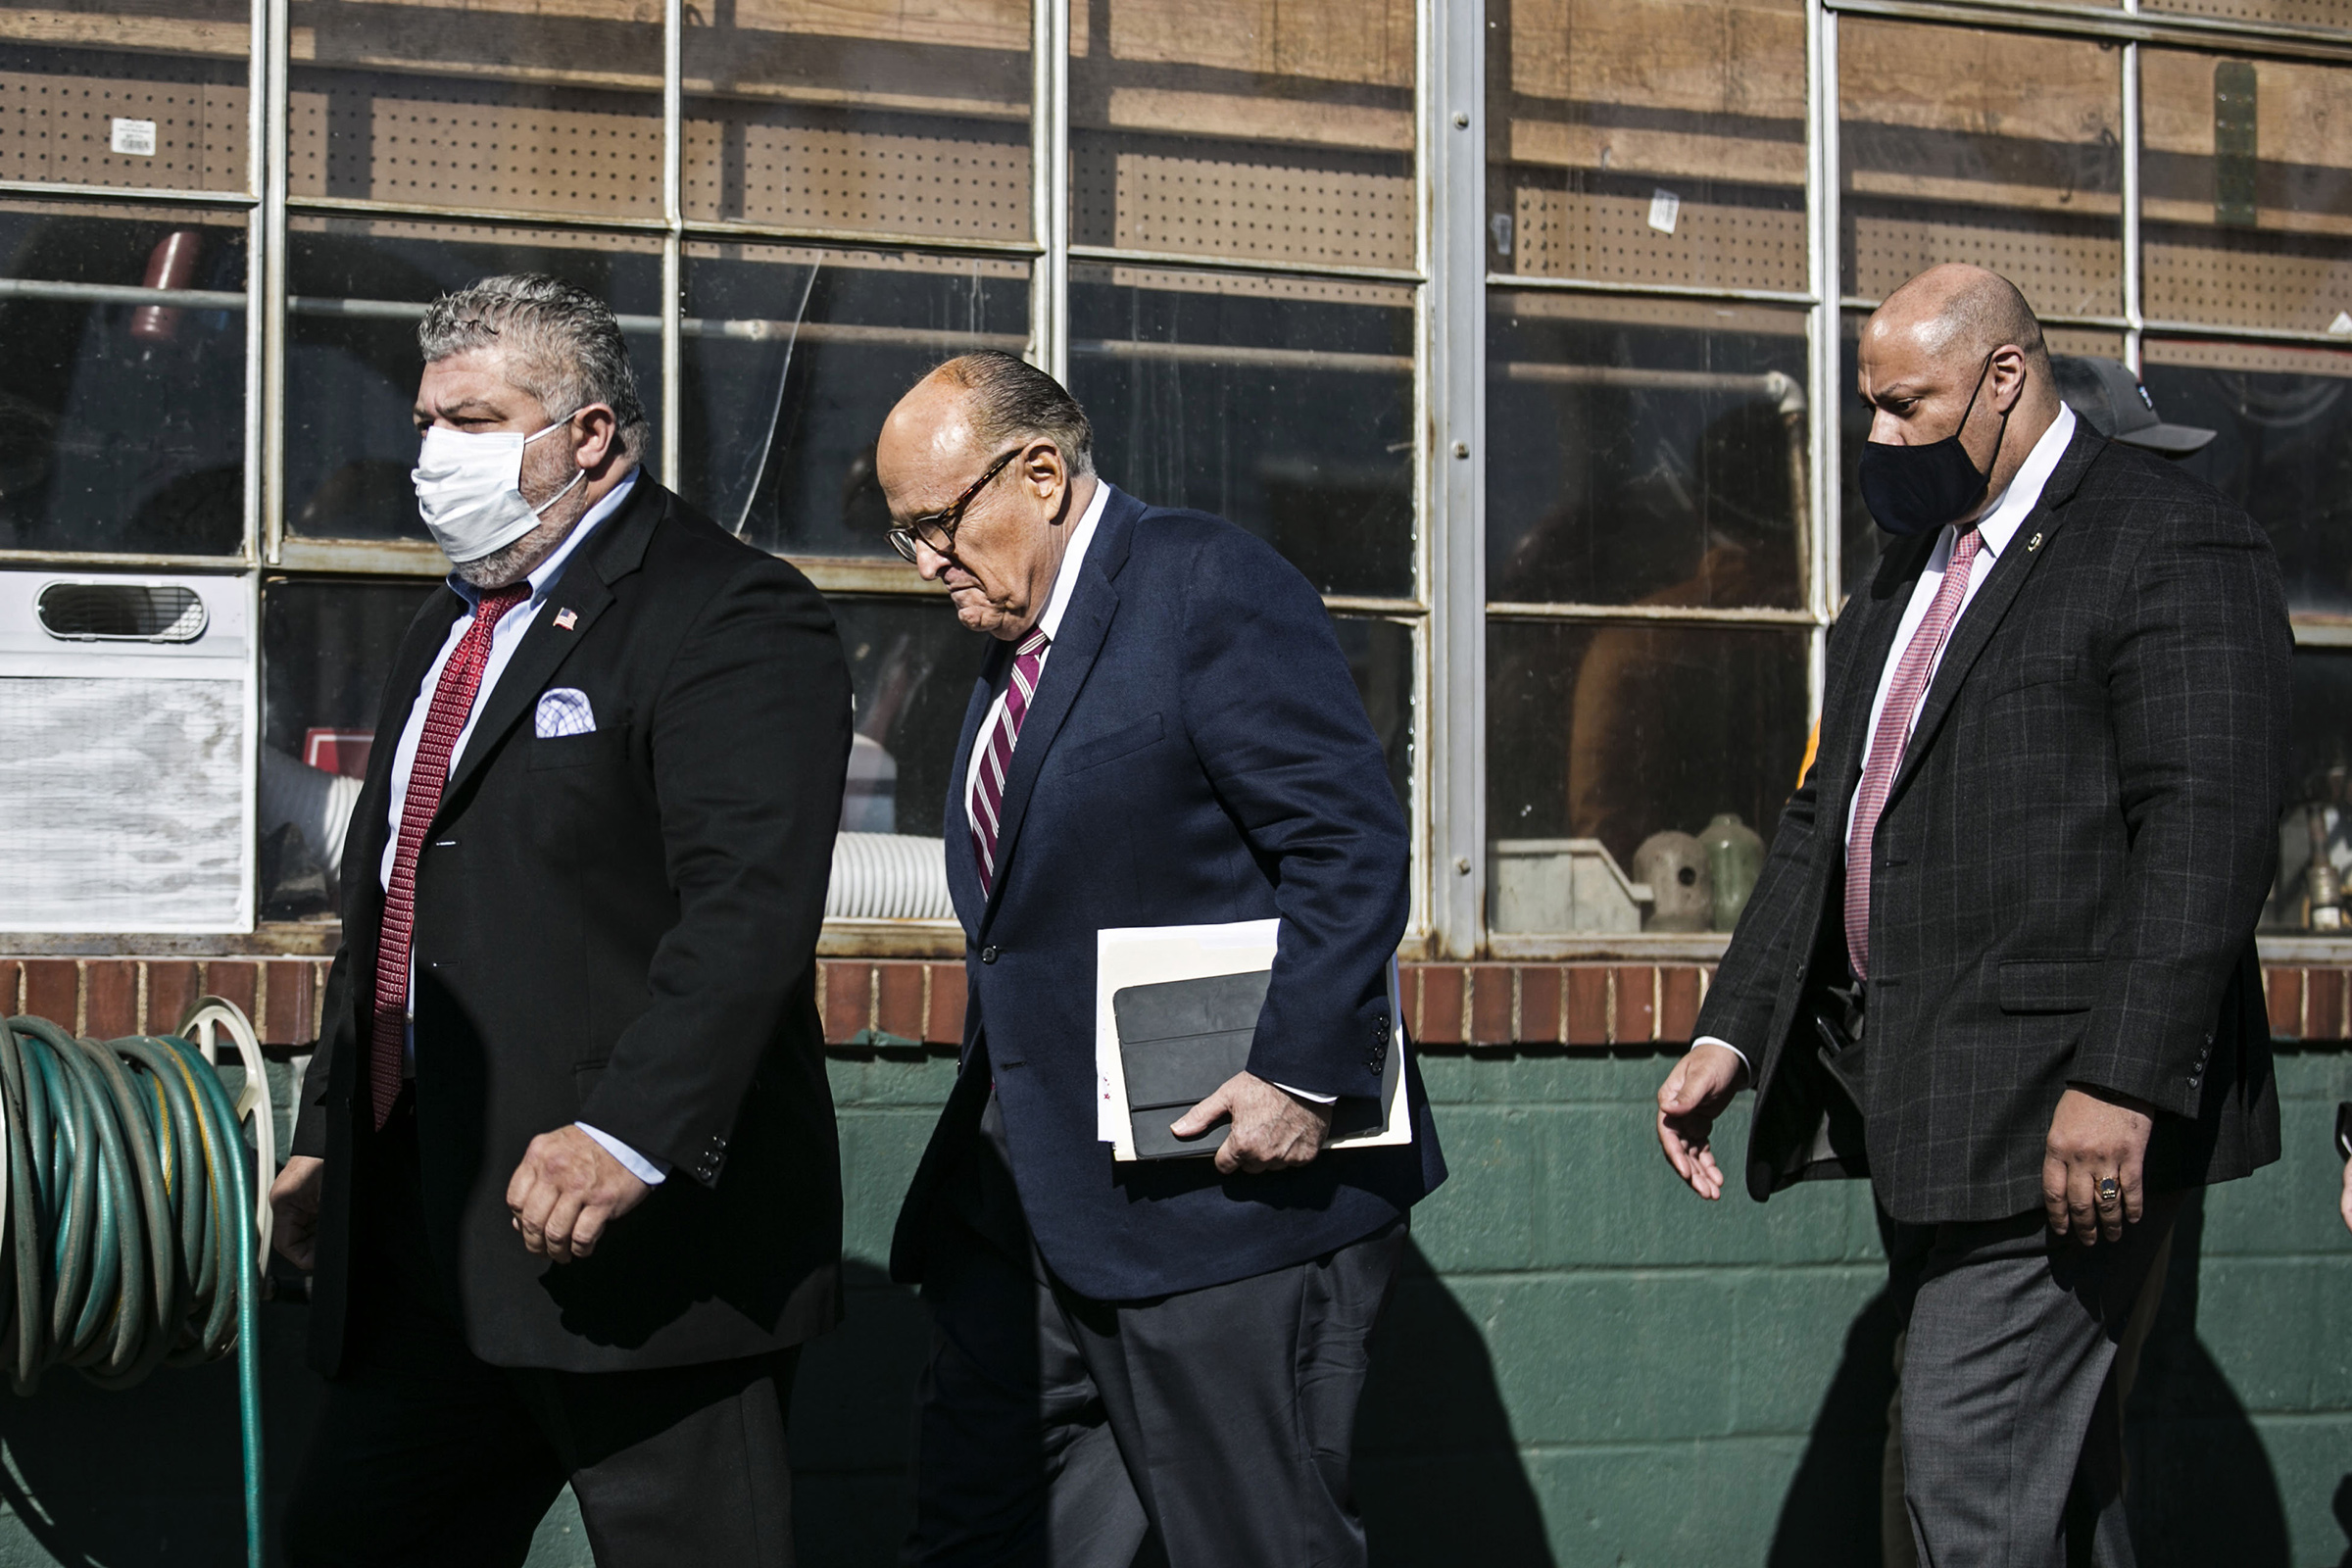 Rudy Giuliani arrives to a news conference in the parking lot of Four Seasons Total Landscaping in Philadelphia, on Nov. 7. (Pontus Höök—Aftonbladet/Sipa USA)